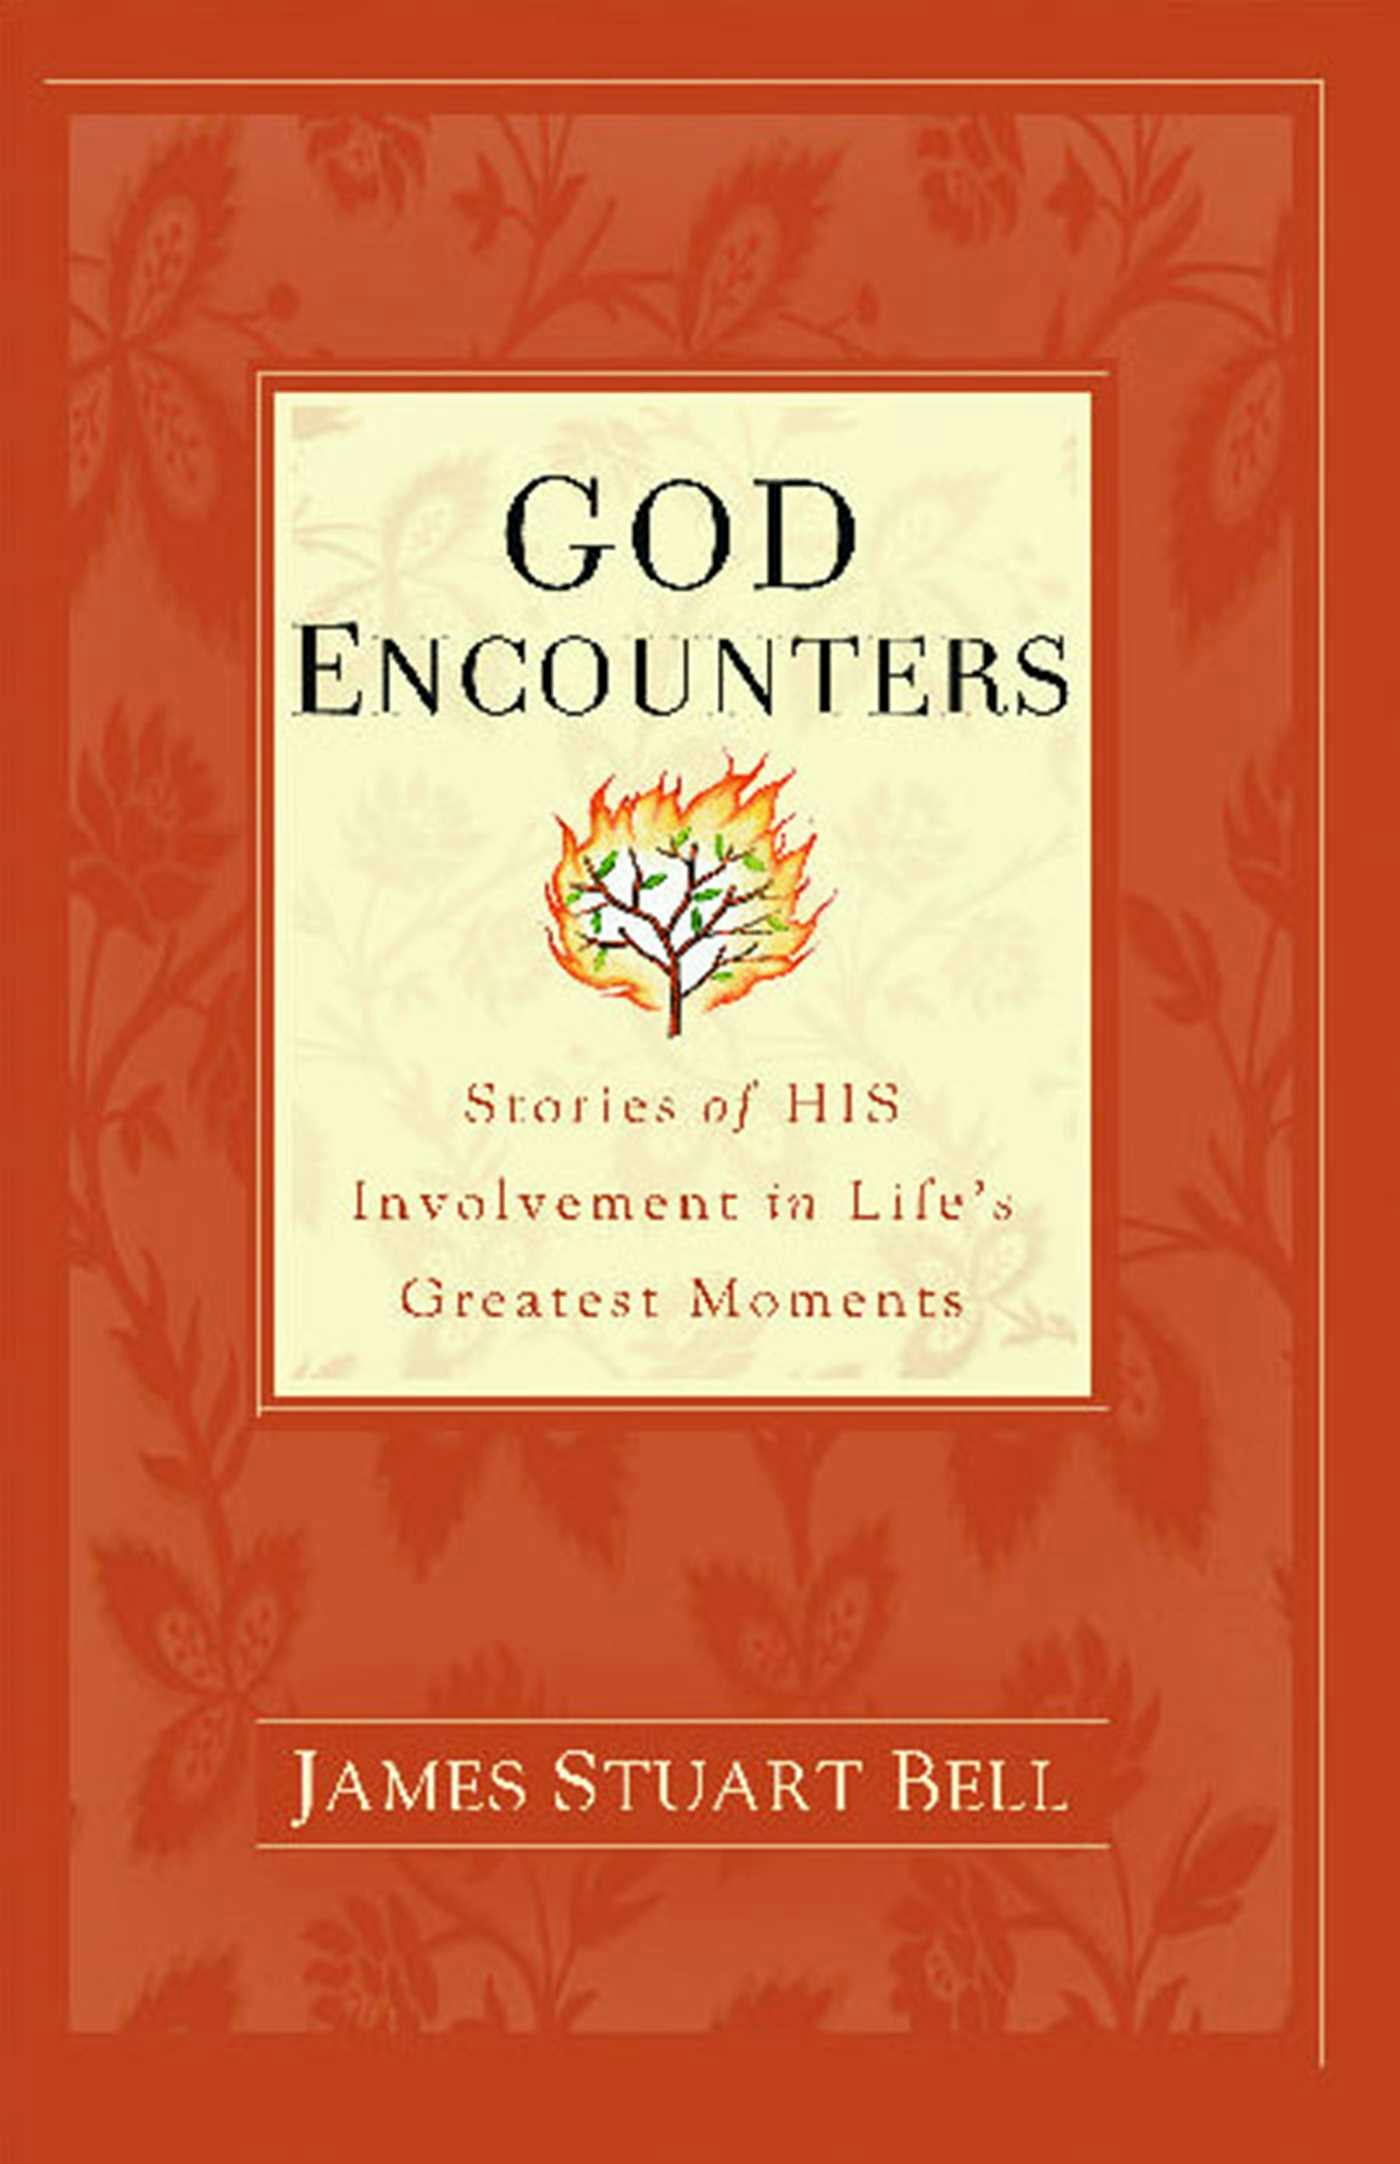 God Encounters: Stories of His Involvement in Life's Greatest Moments - James Stuart Bell